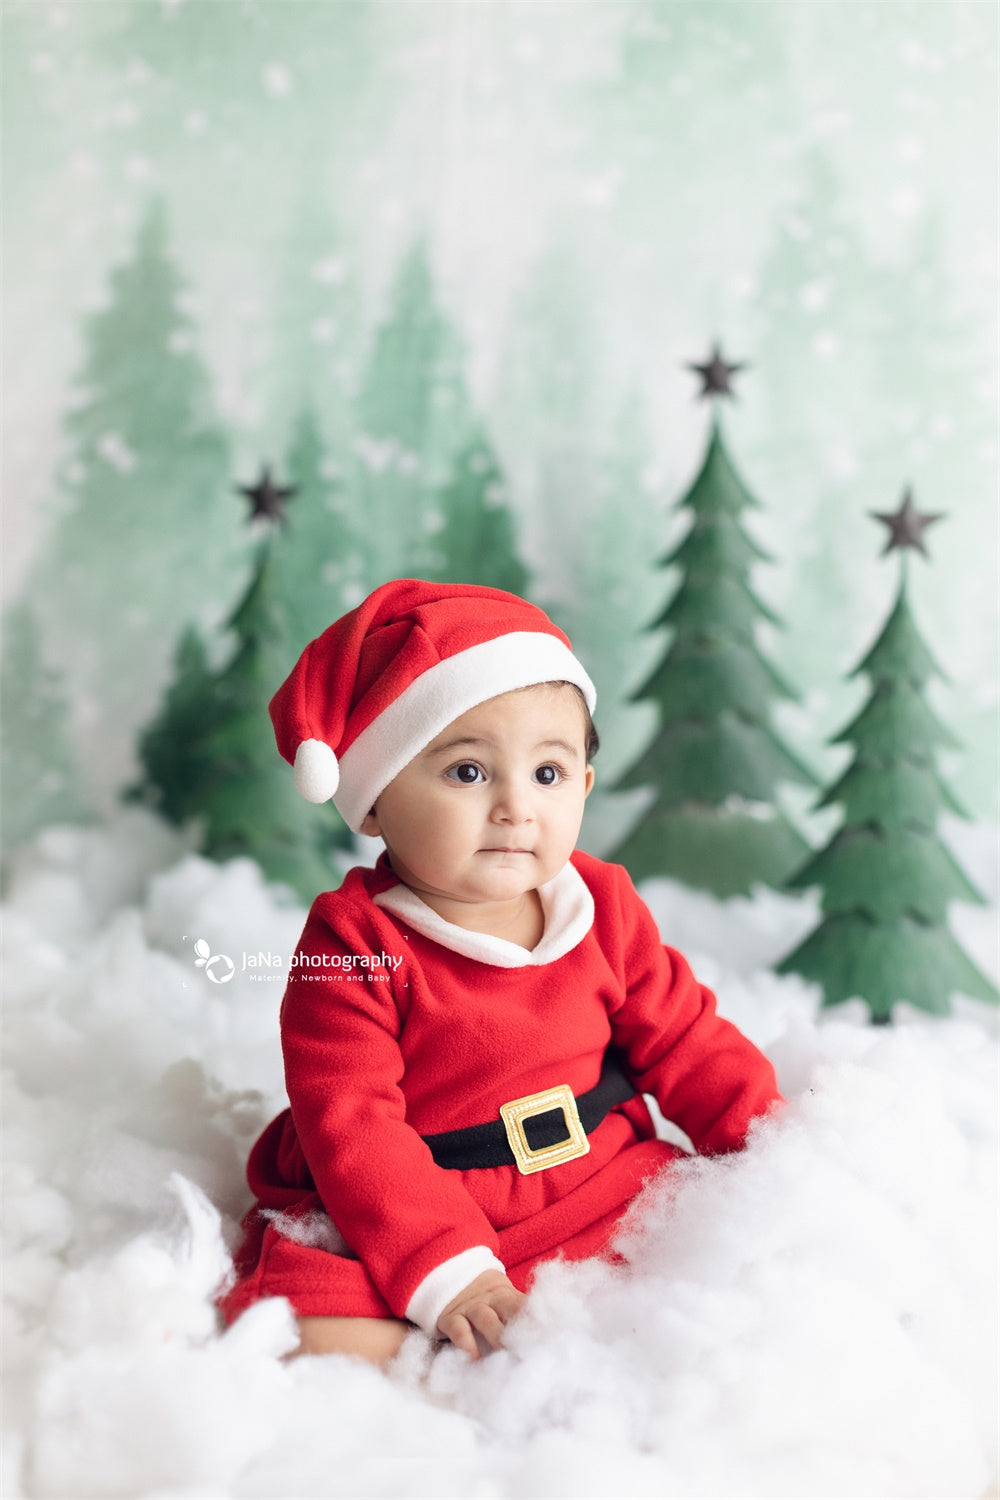 Christmas Trees Backdrop Snow Background Baby Photography ZG-71